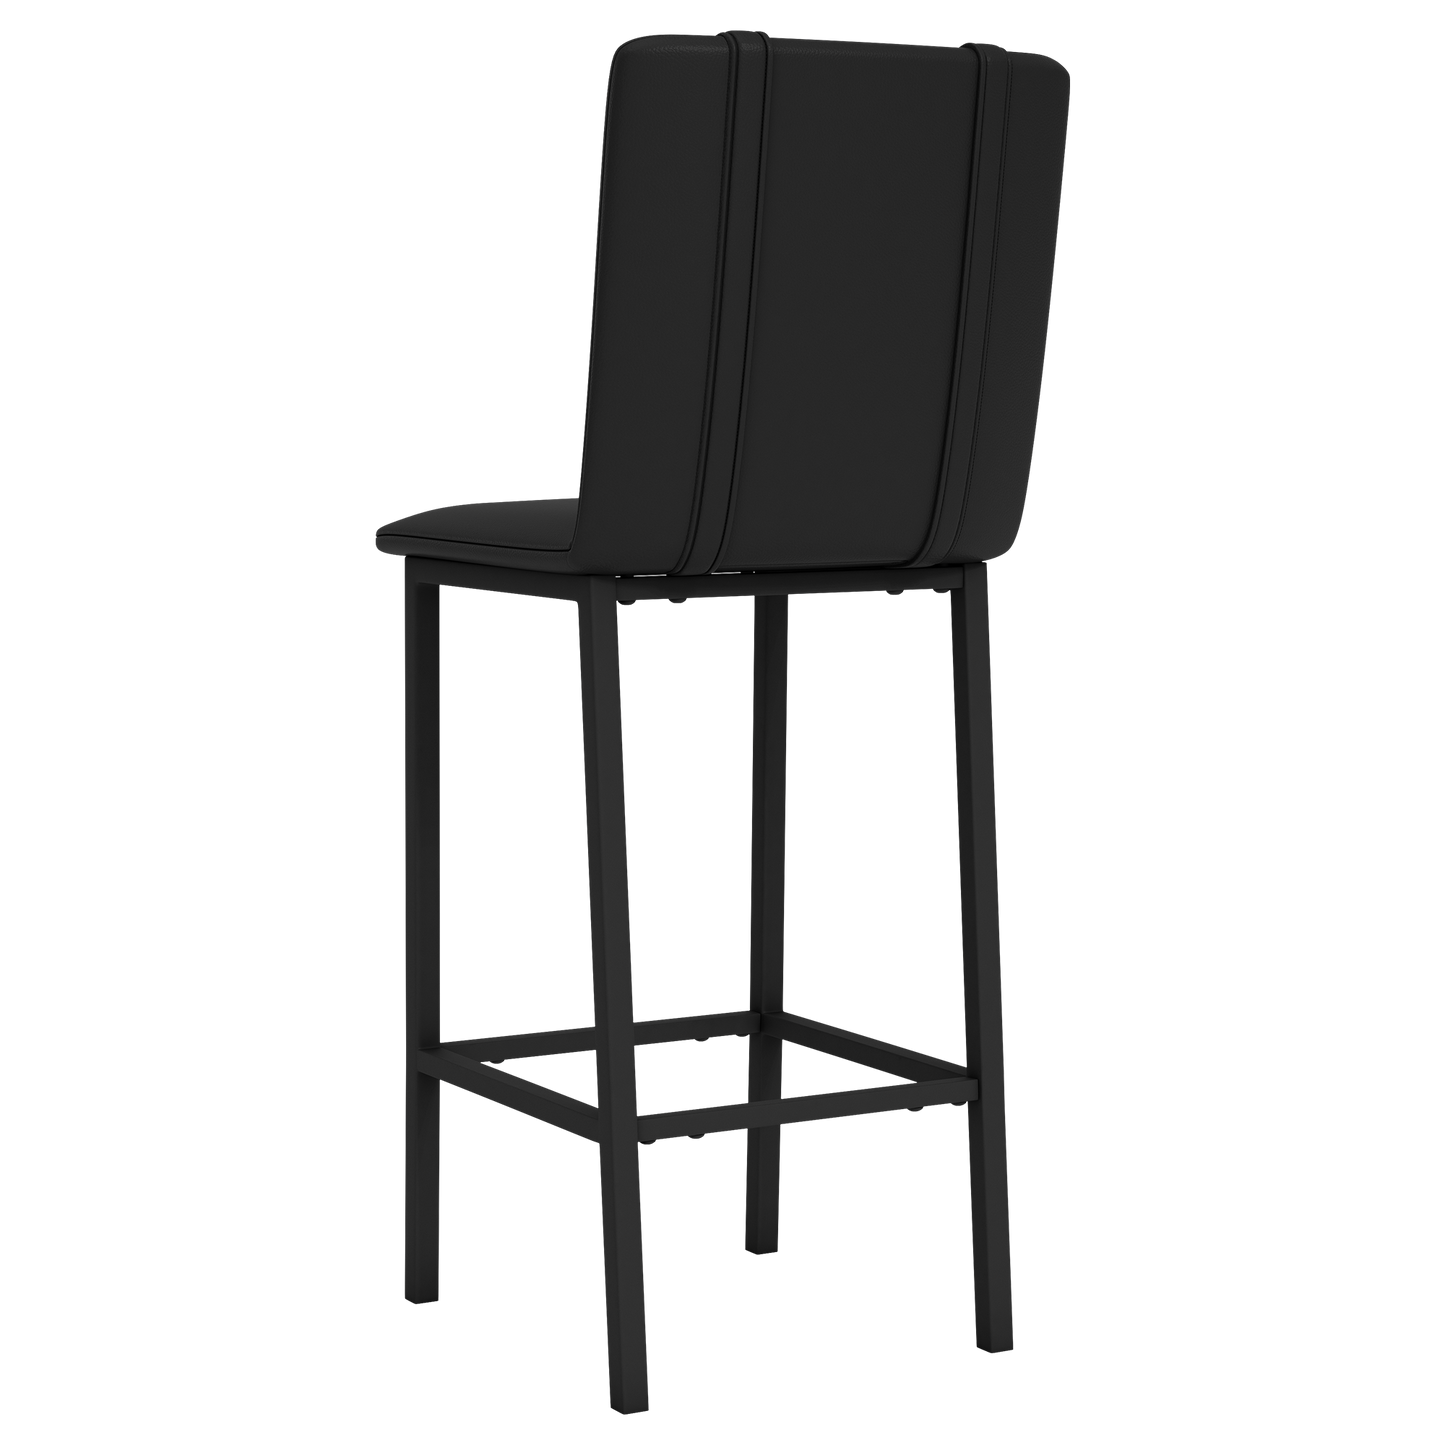 Bar Stool 500 with Indiana State Sycamores Logo Set of 2